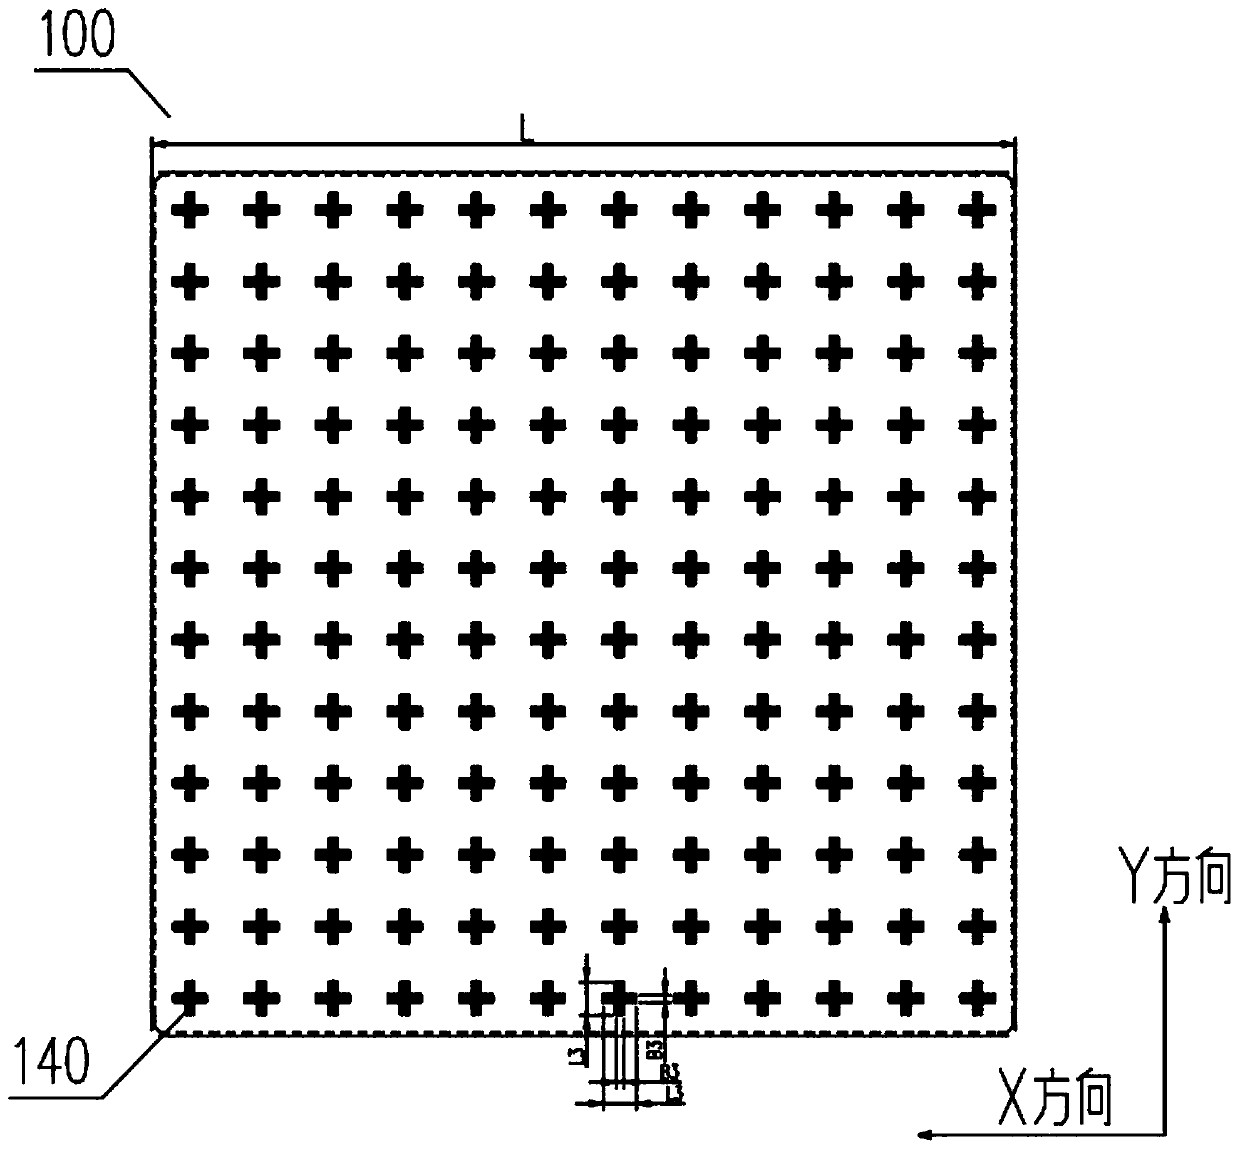 Solar cell photovoltaic module and solar cell photovoltaic assembly